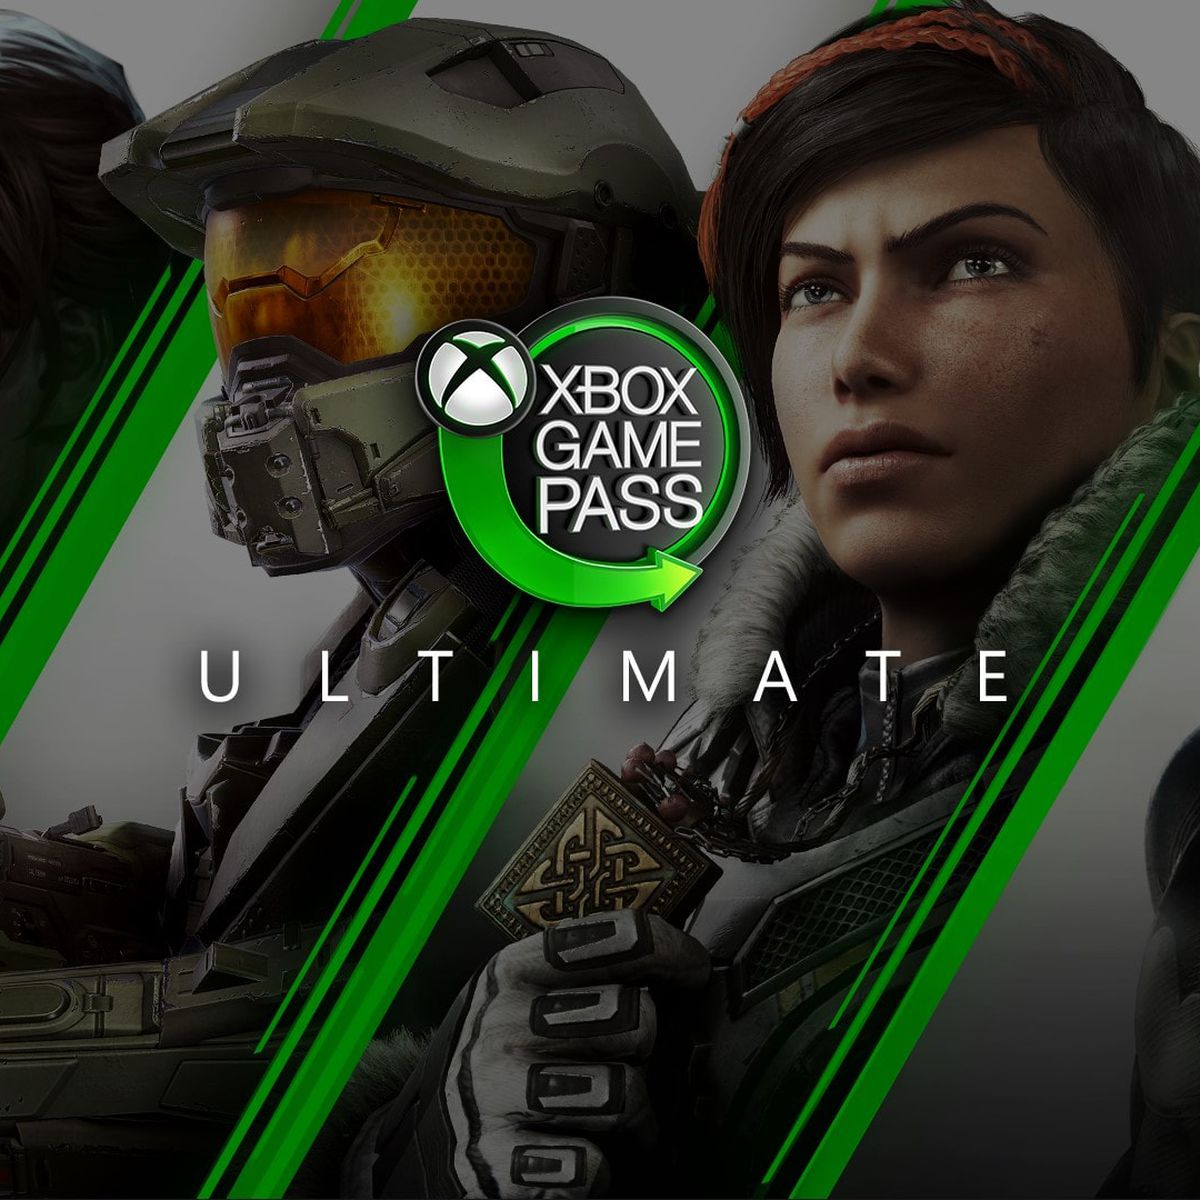 The Xbox Game Pass Ultimate logo over a montage of four characters